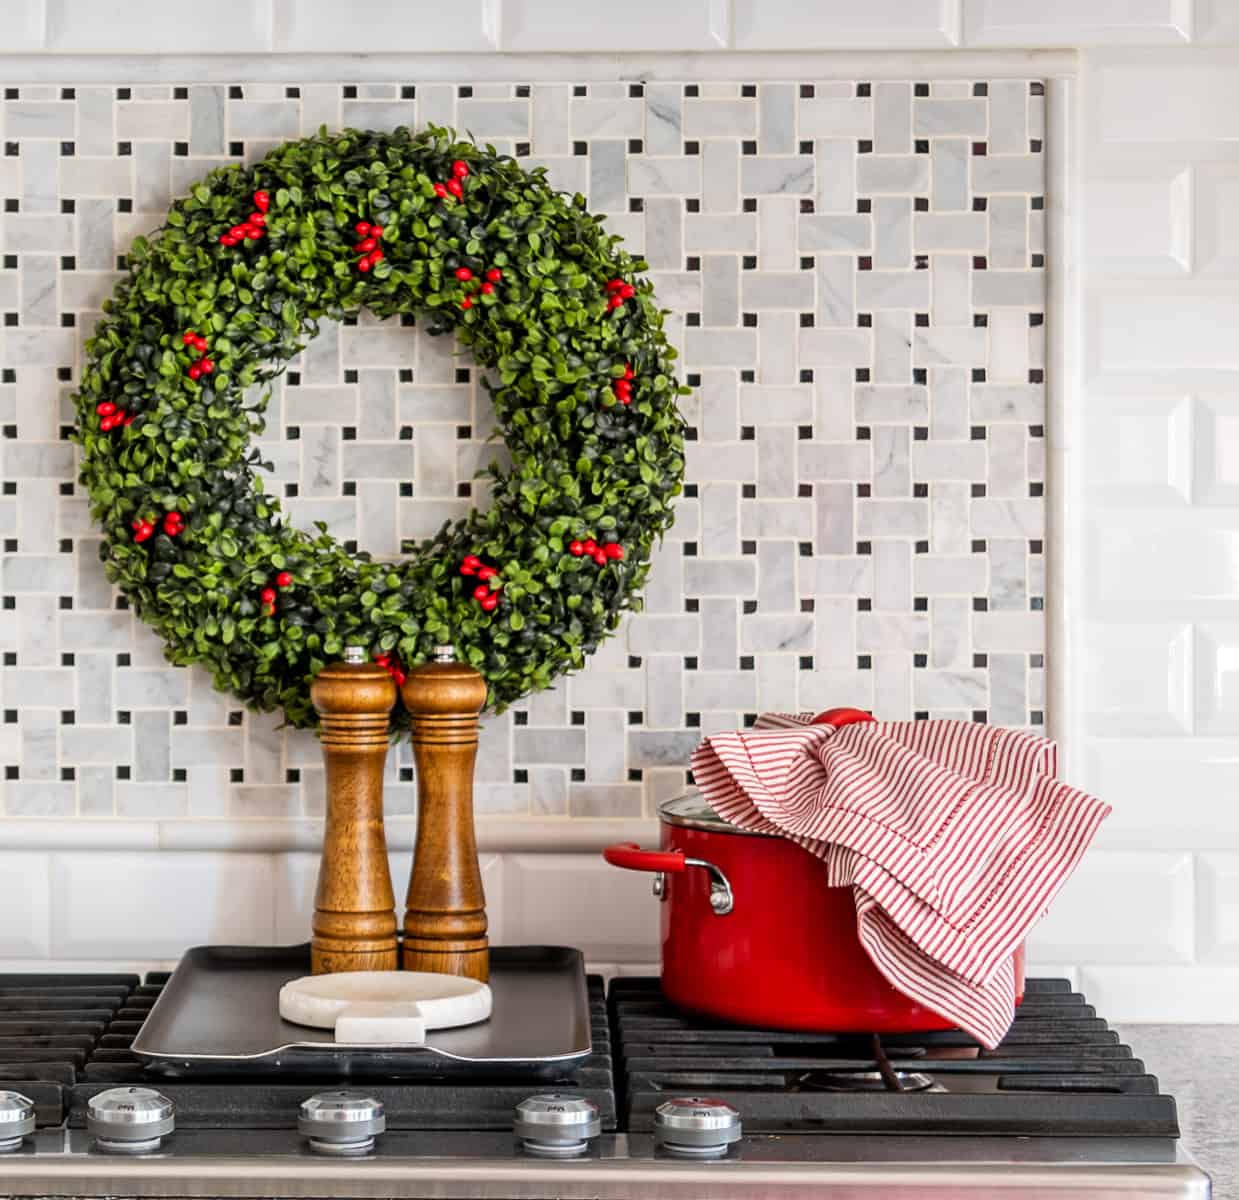 Christmas wreath on backsplash above cooktop with red dutch oven, red and white striped kitchen towel and wood salt and pepper mills